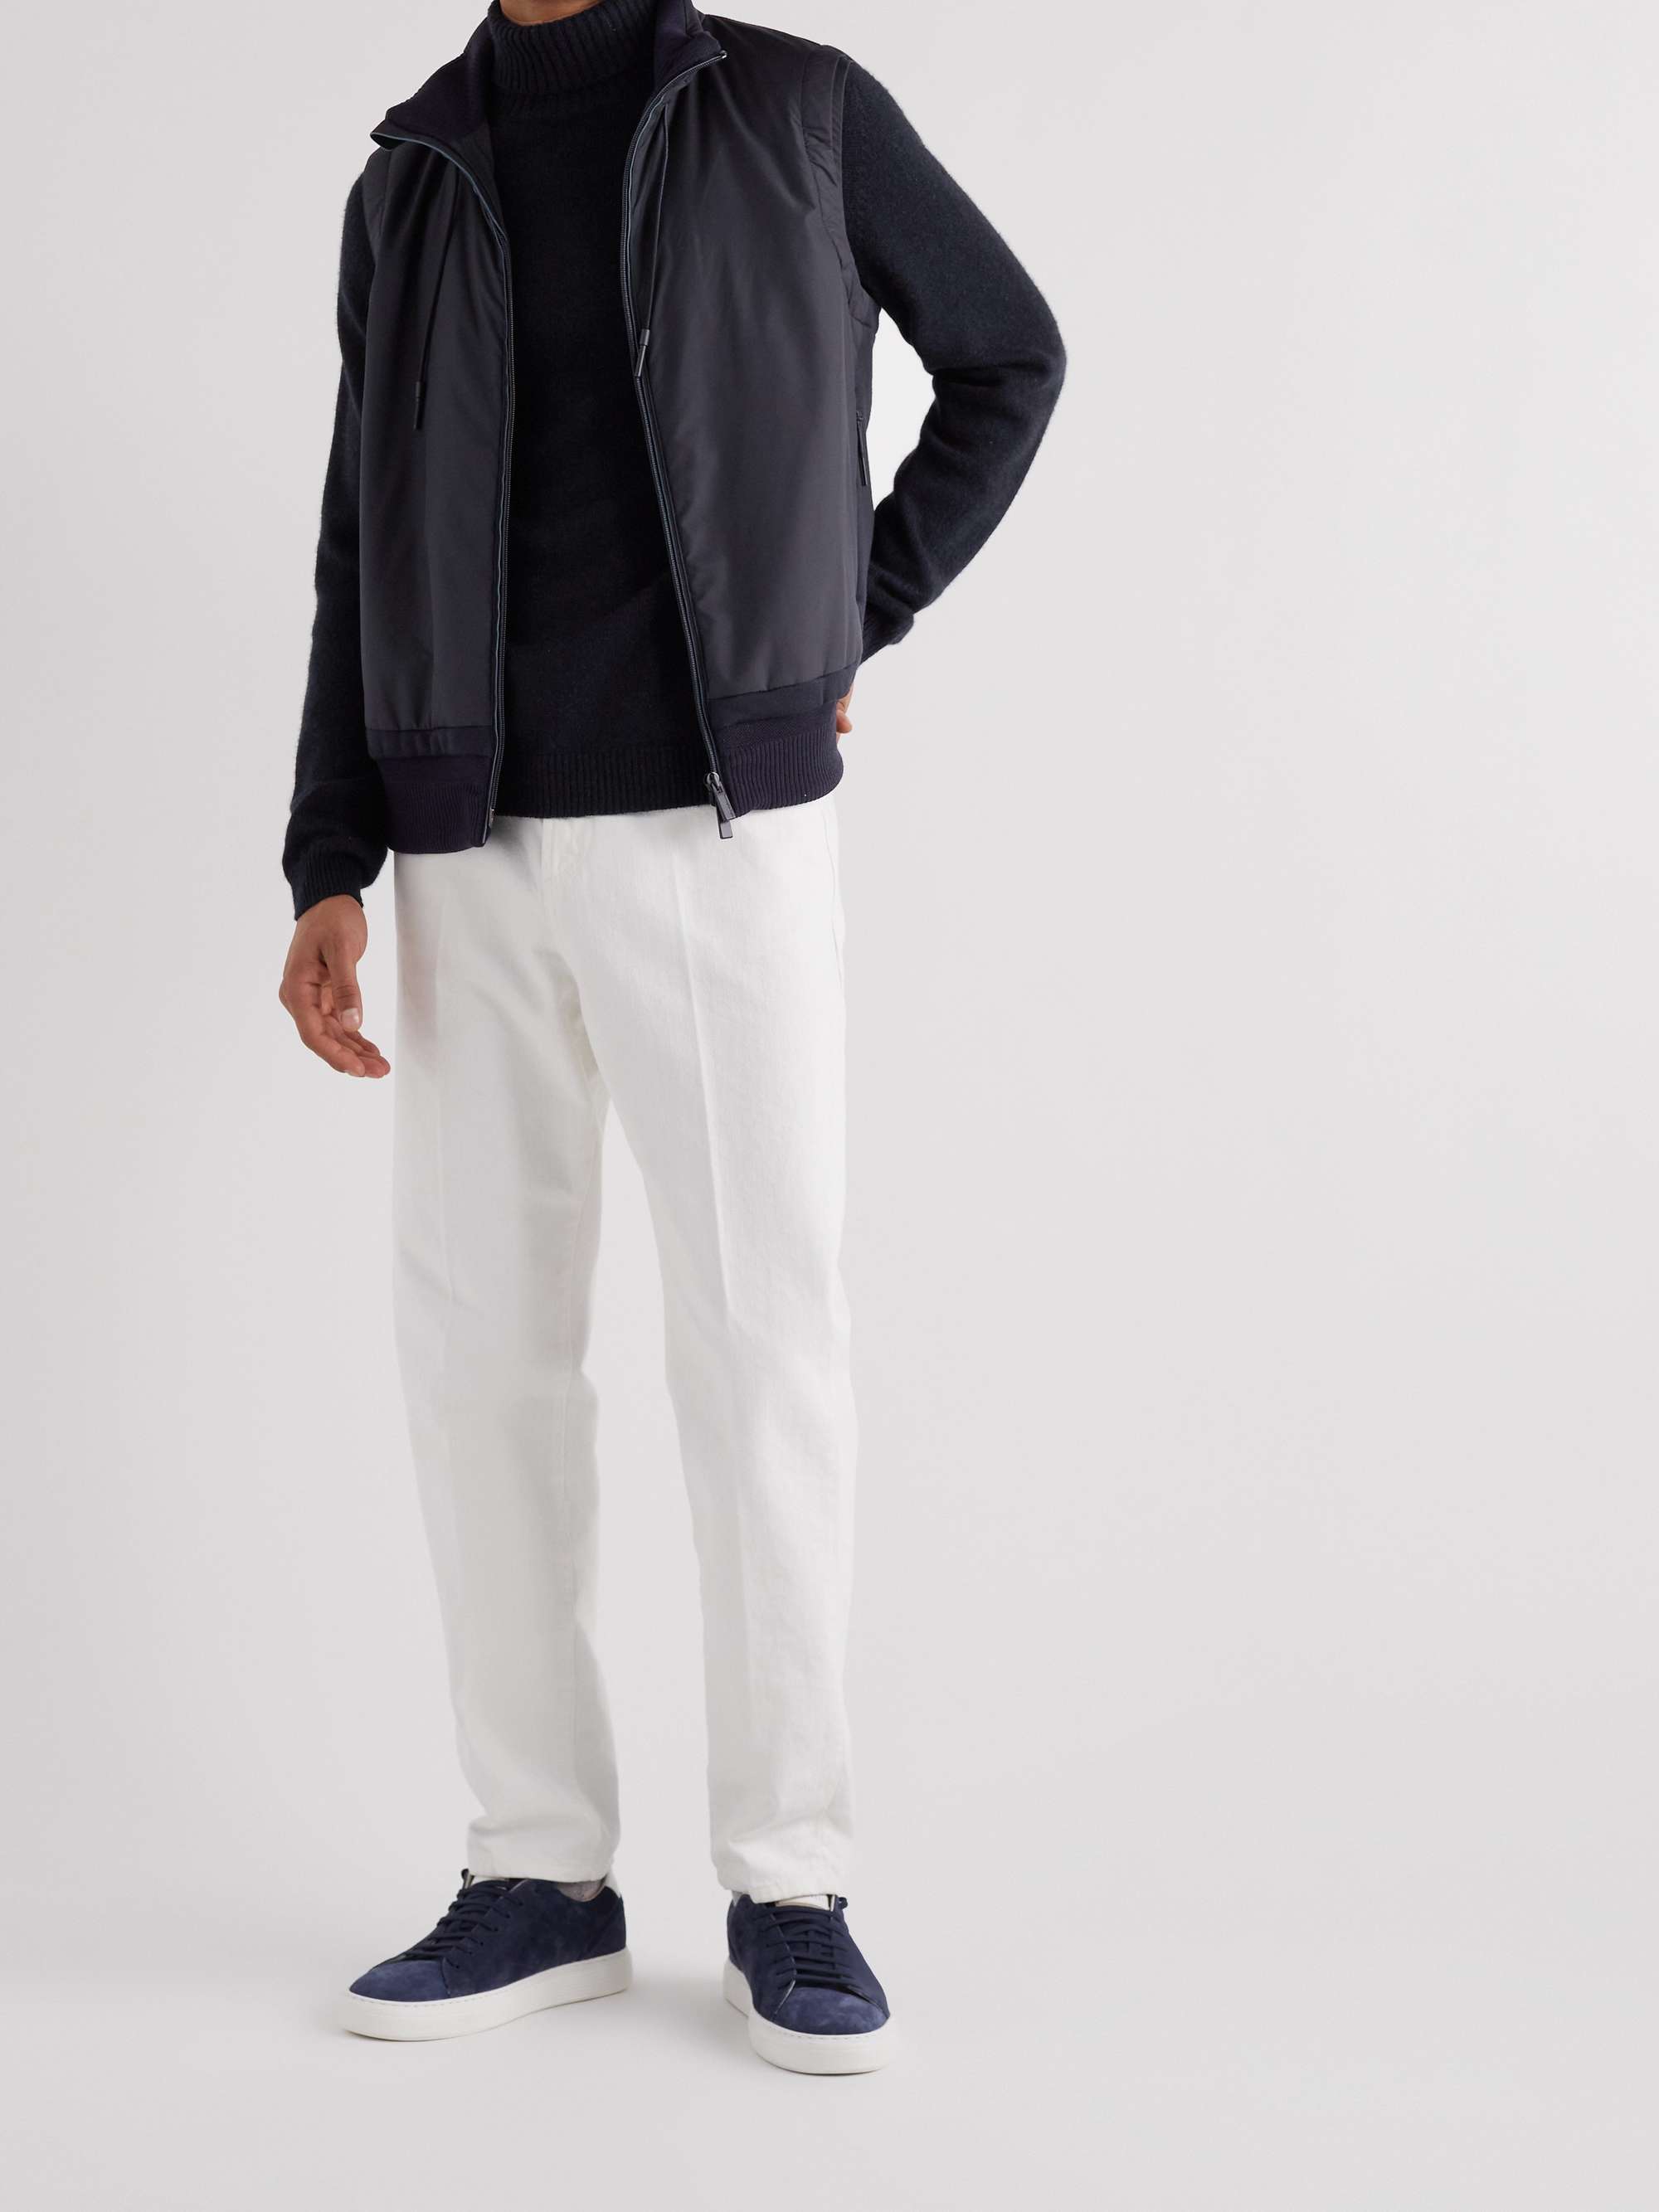 ZEGNA High Performance Quilted Shell-Panelled Wool Gilet